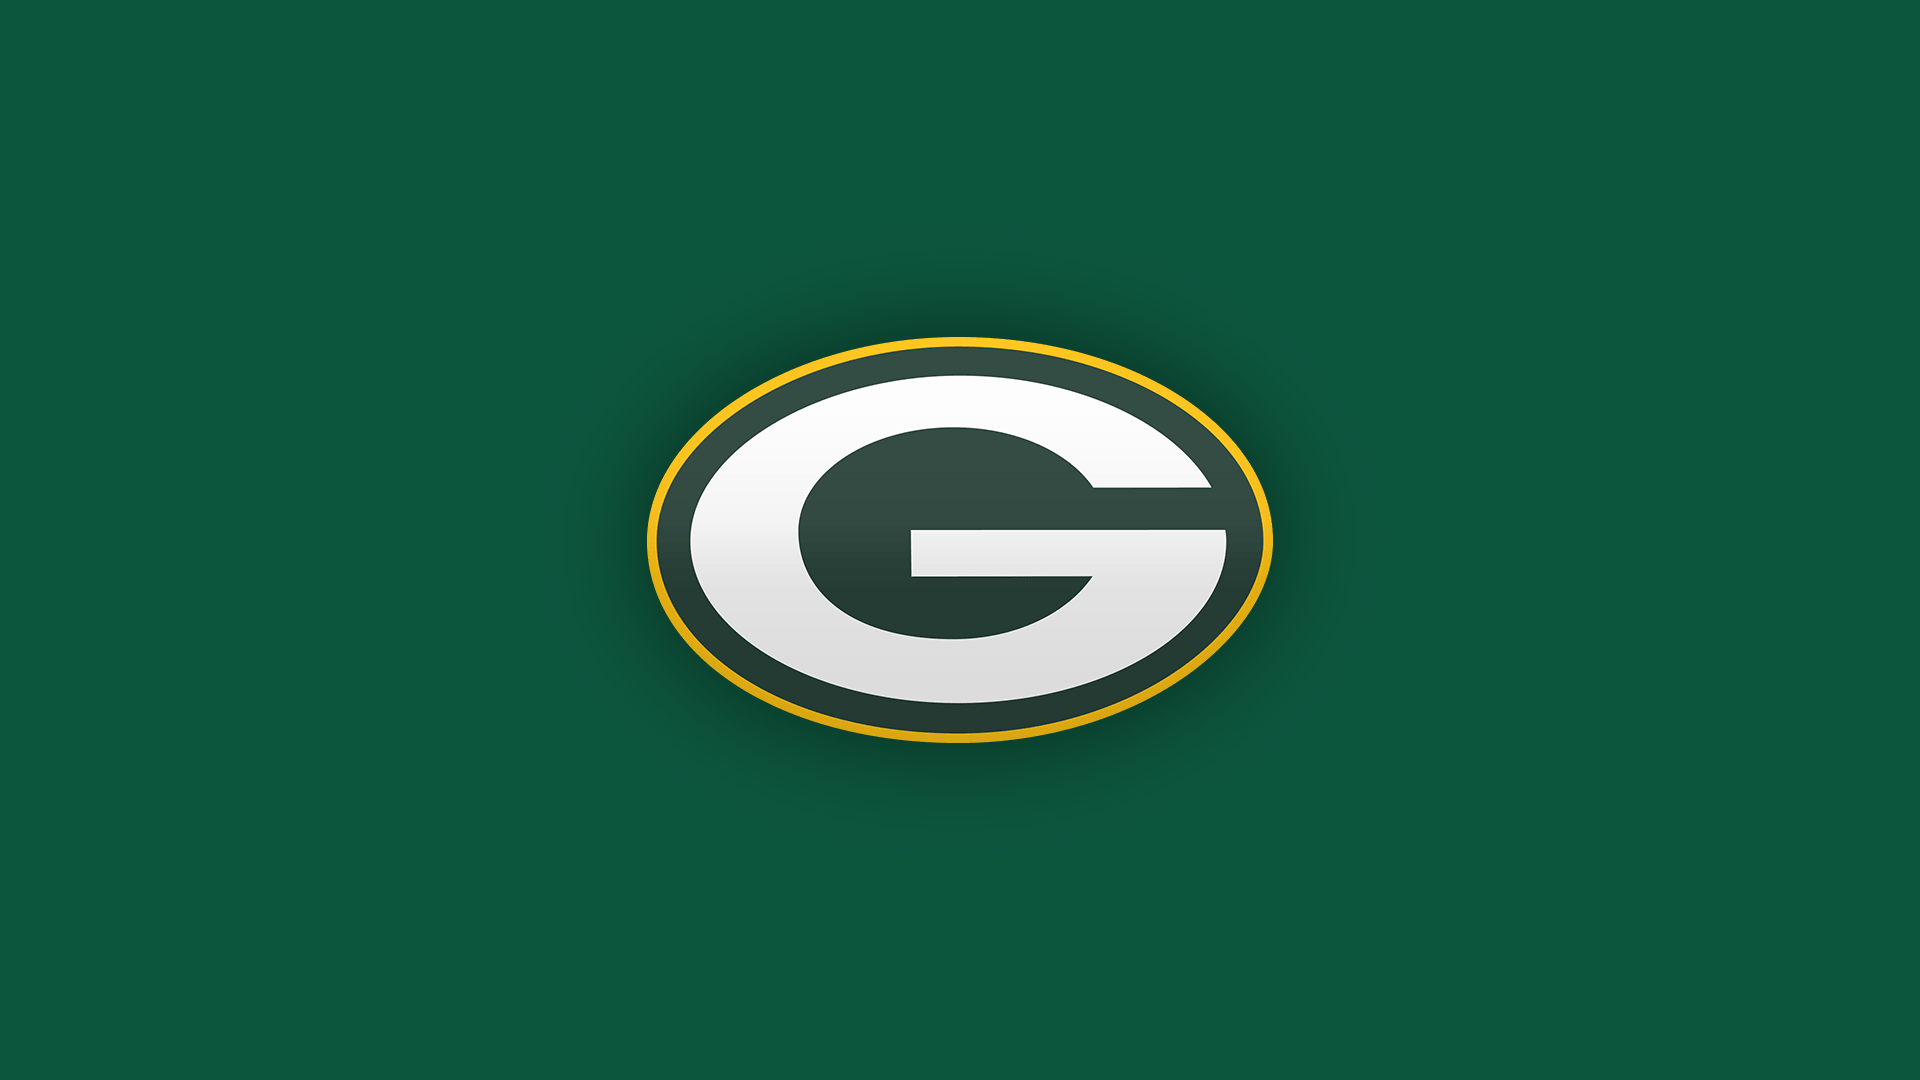 How to Watch Green Bay Packers Games Online Live Without Cable in